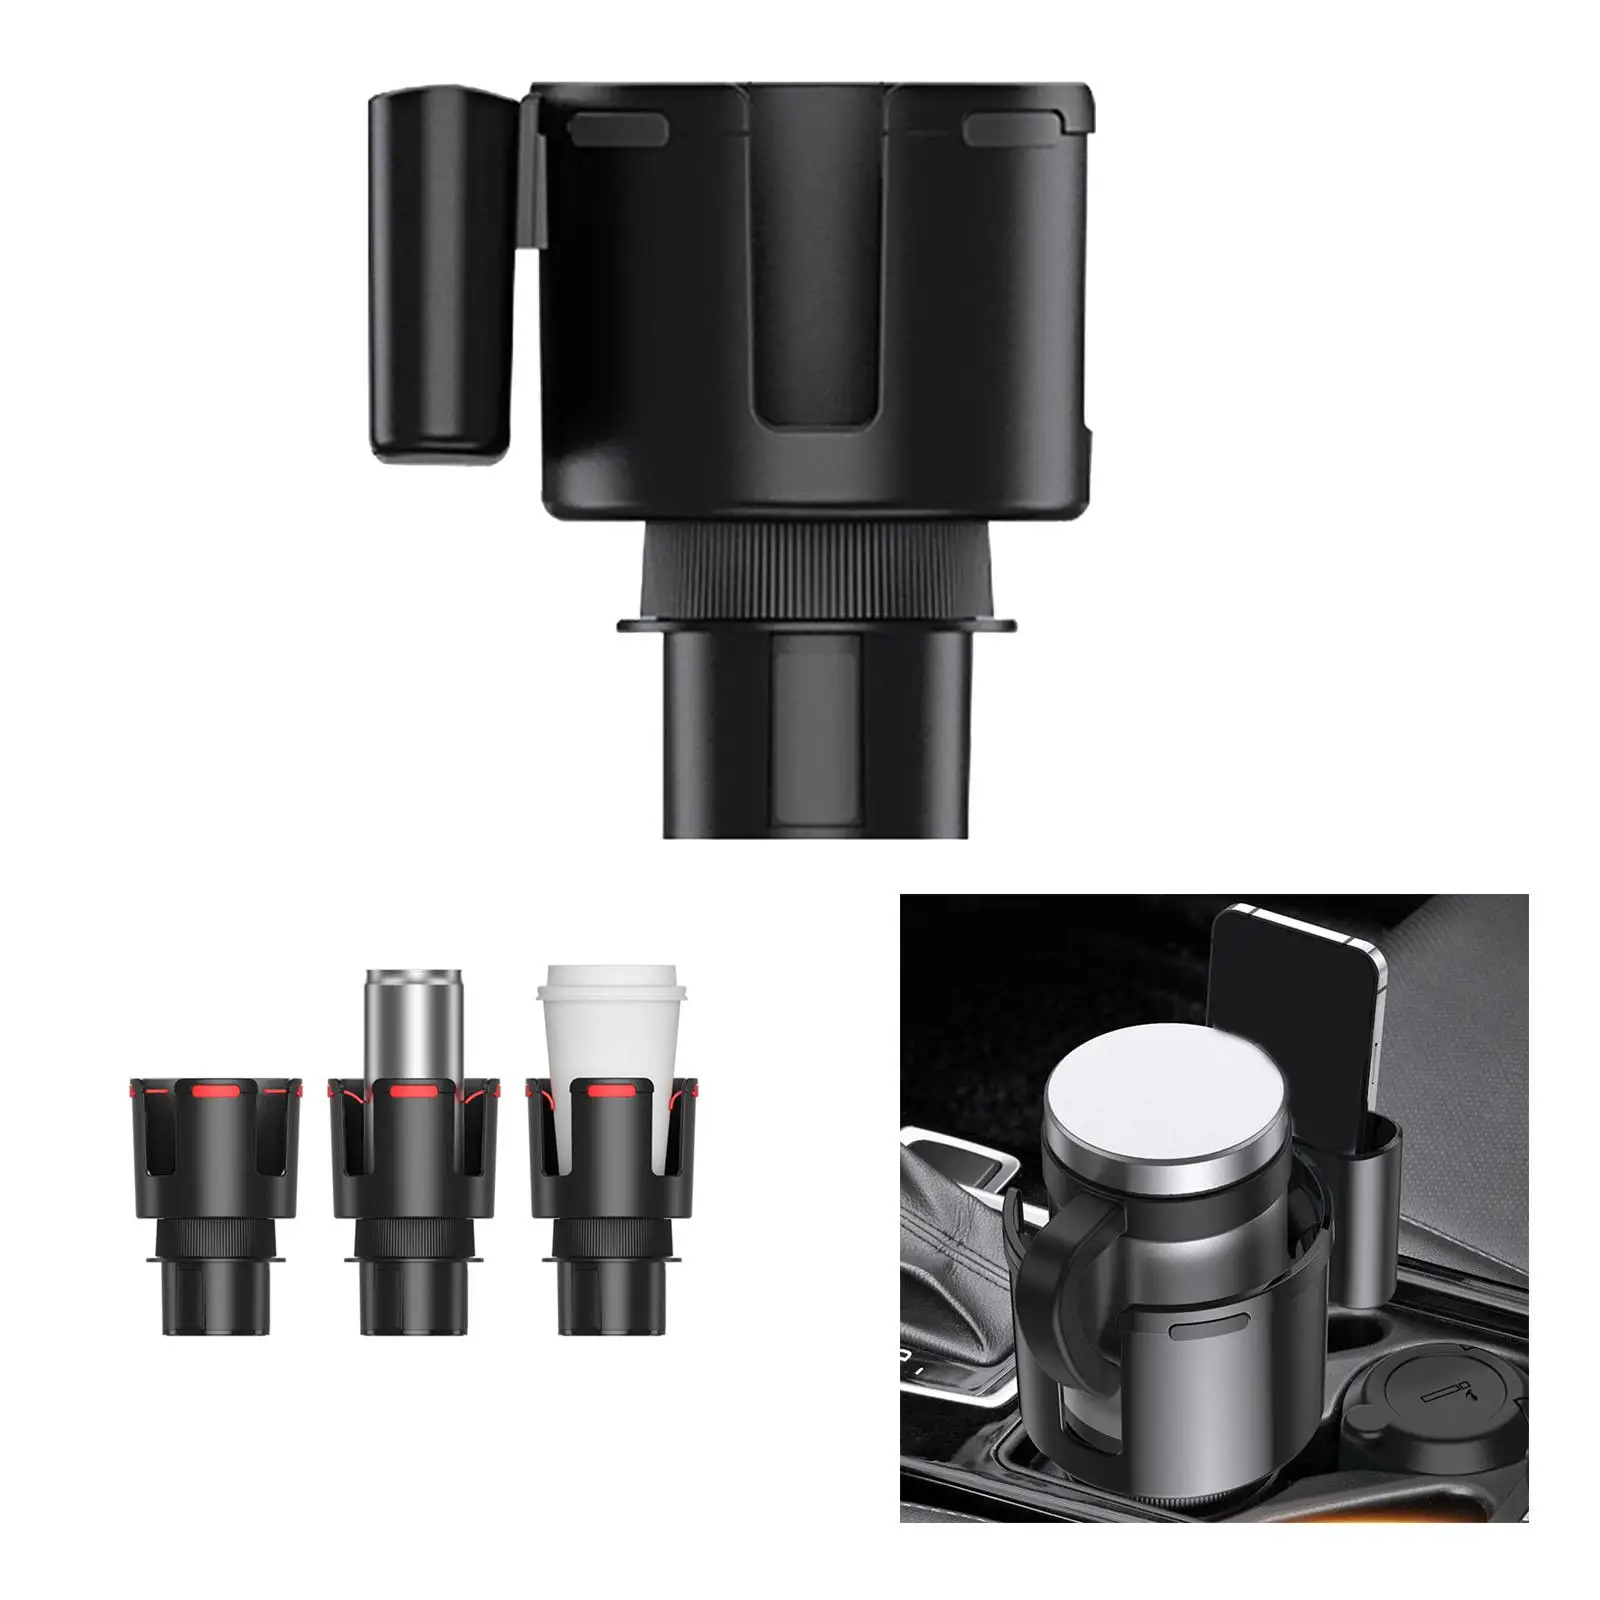 Car Cup Holder Expander Adapter with Phone Stand Universal Rack 2 in 1 for Vehicle Spare Part Durable Replace Accessory